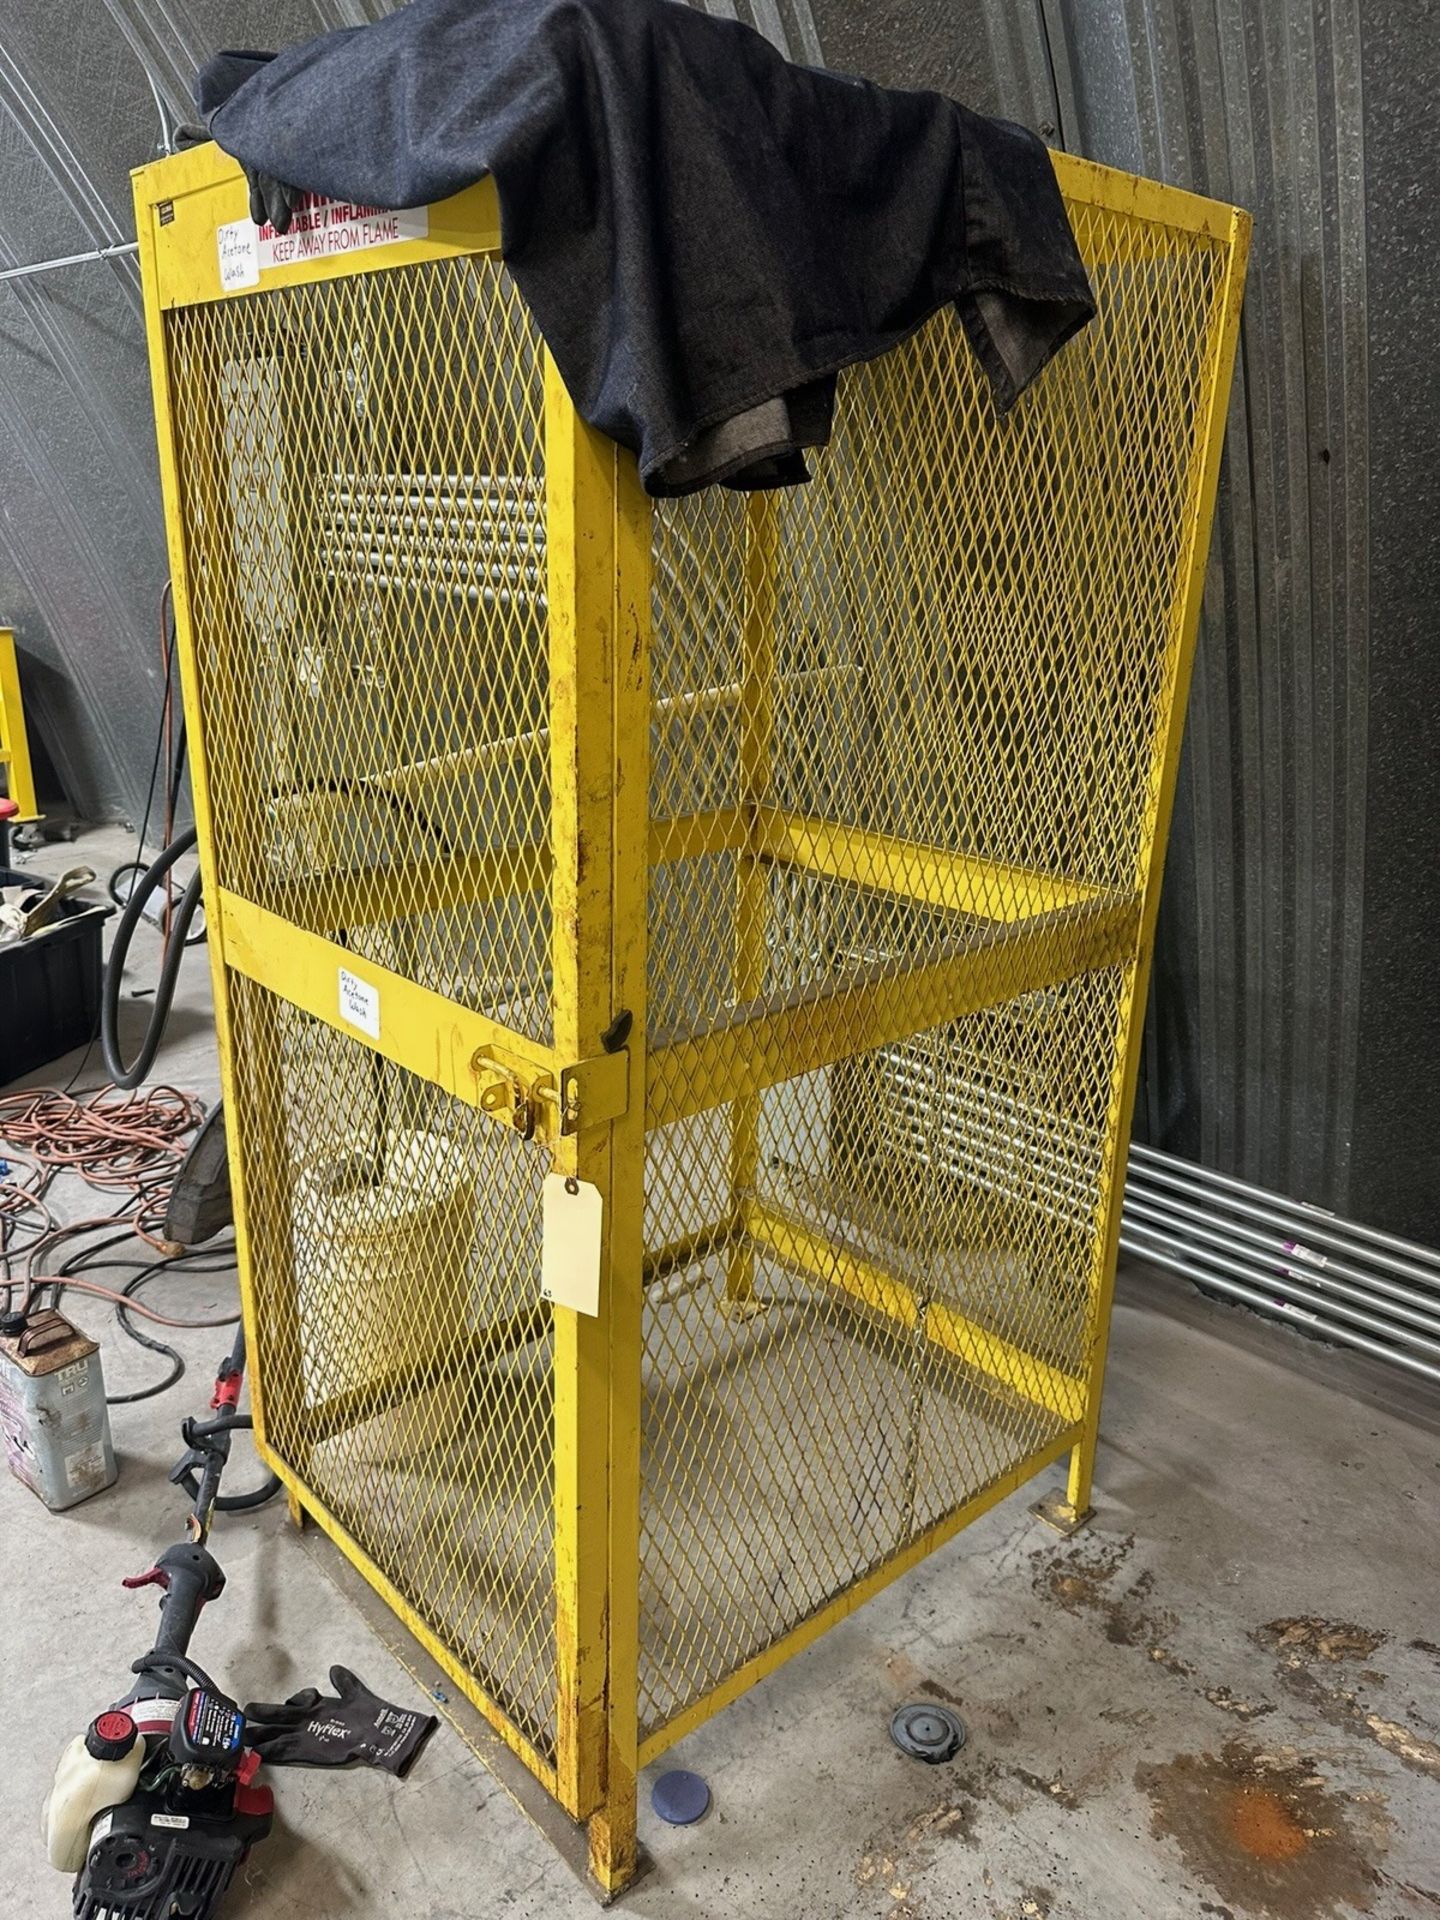 Flammable Tanks storage cage | Rig Fee $50 - Image 2 of 3